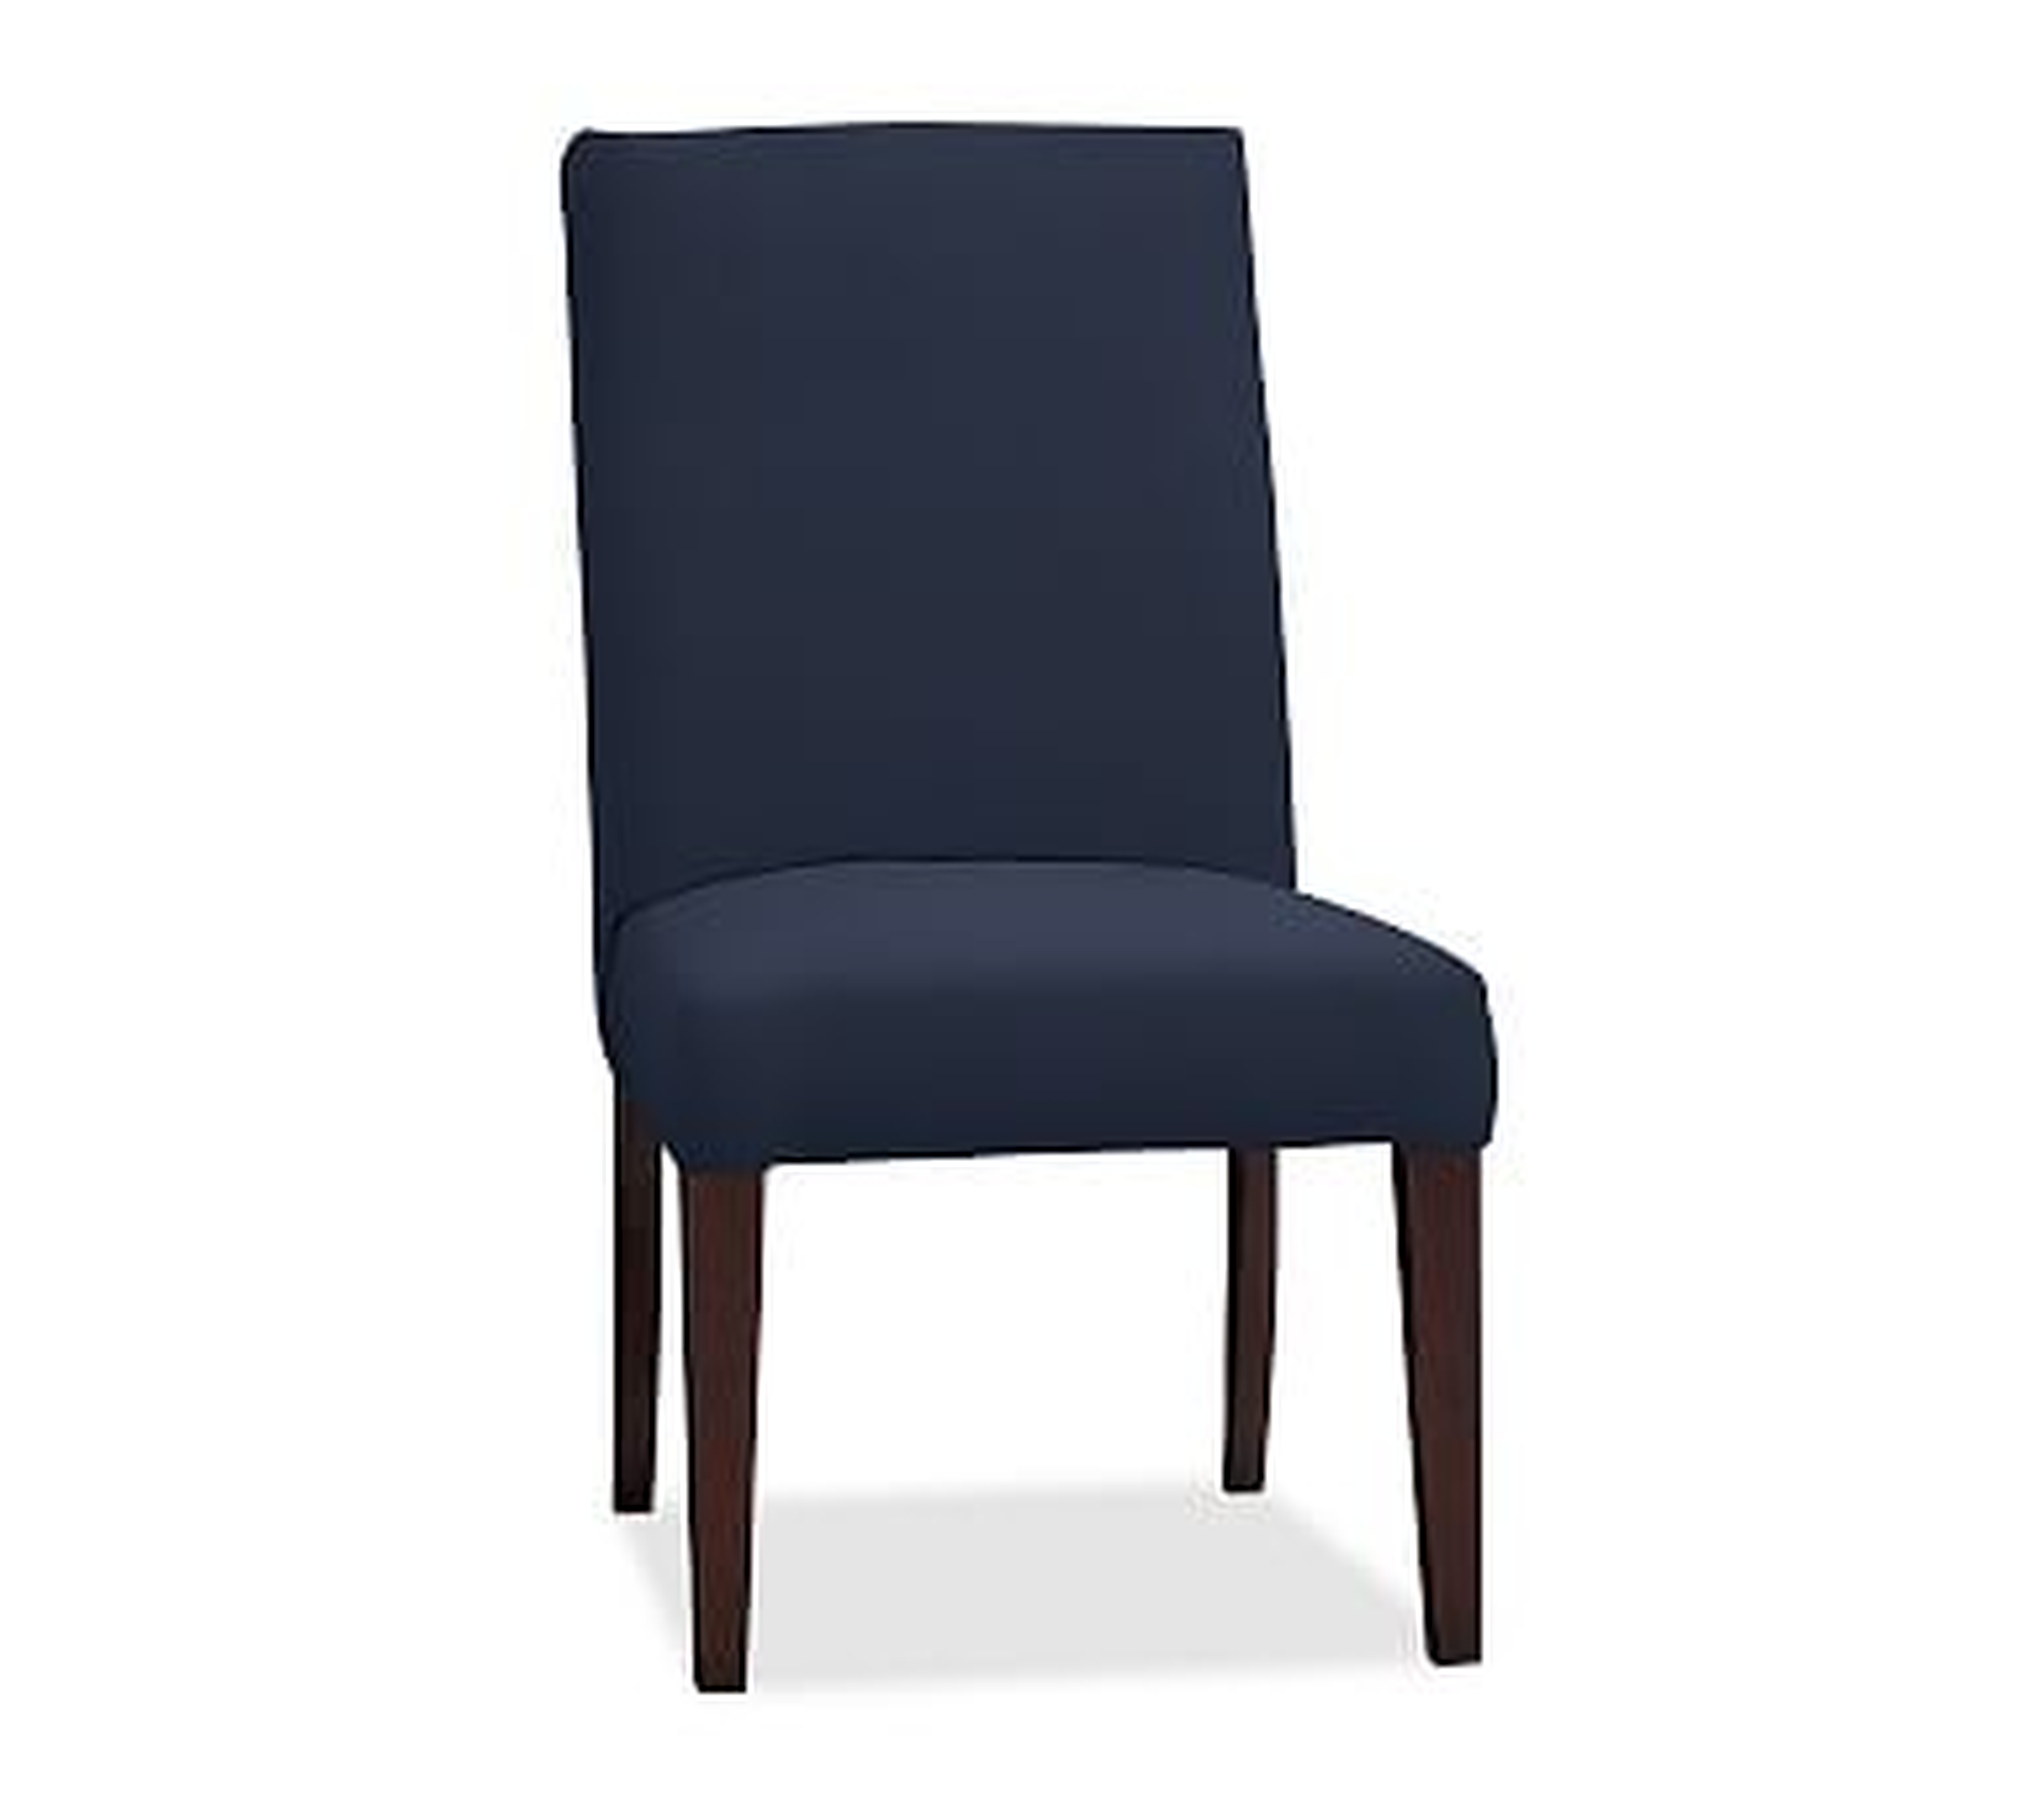 PB Comfort Square Upholstered Dining Side Chair, Twill Cadet Navy, Espresso Leg - Pottery Barn